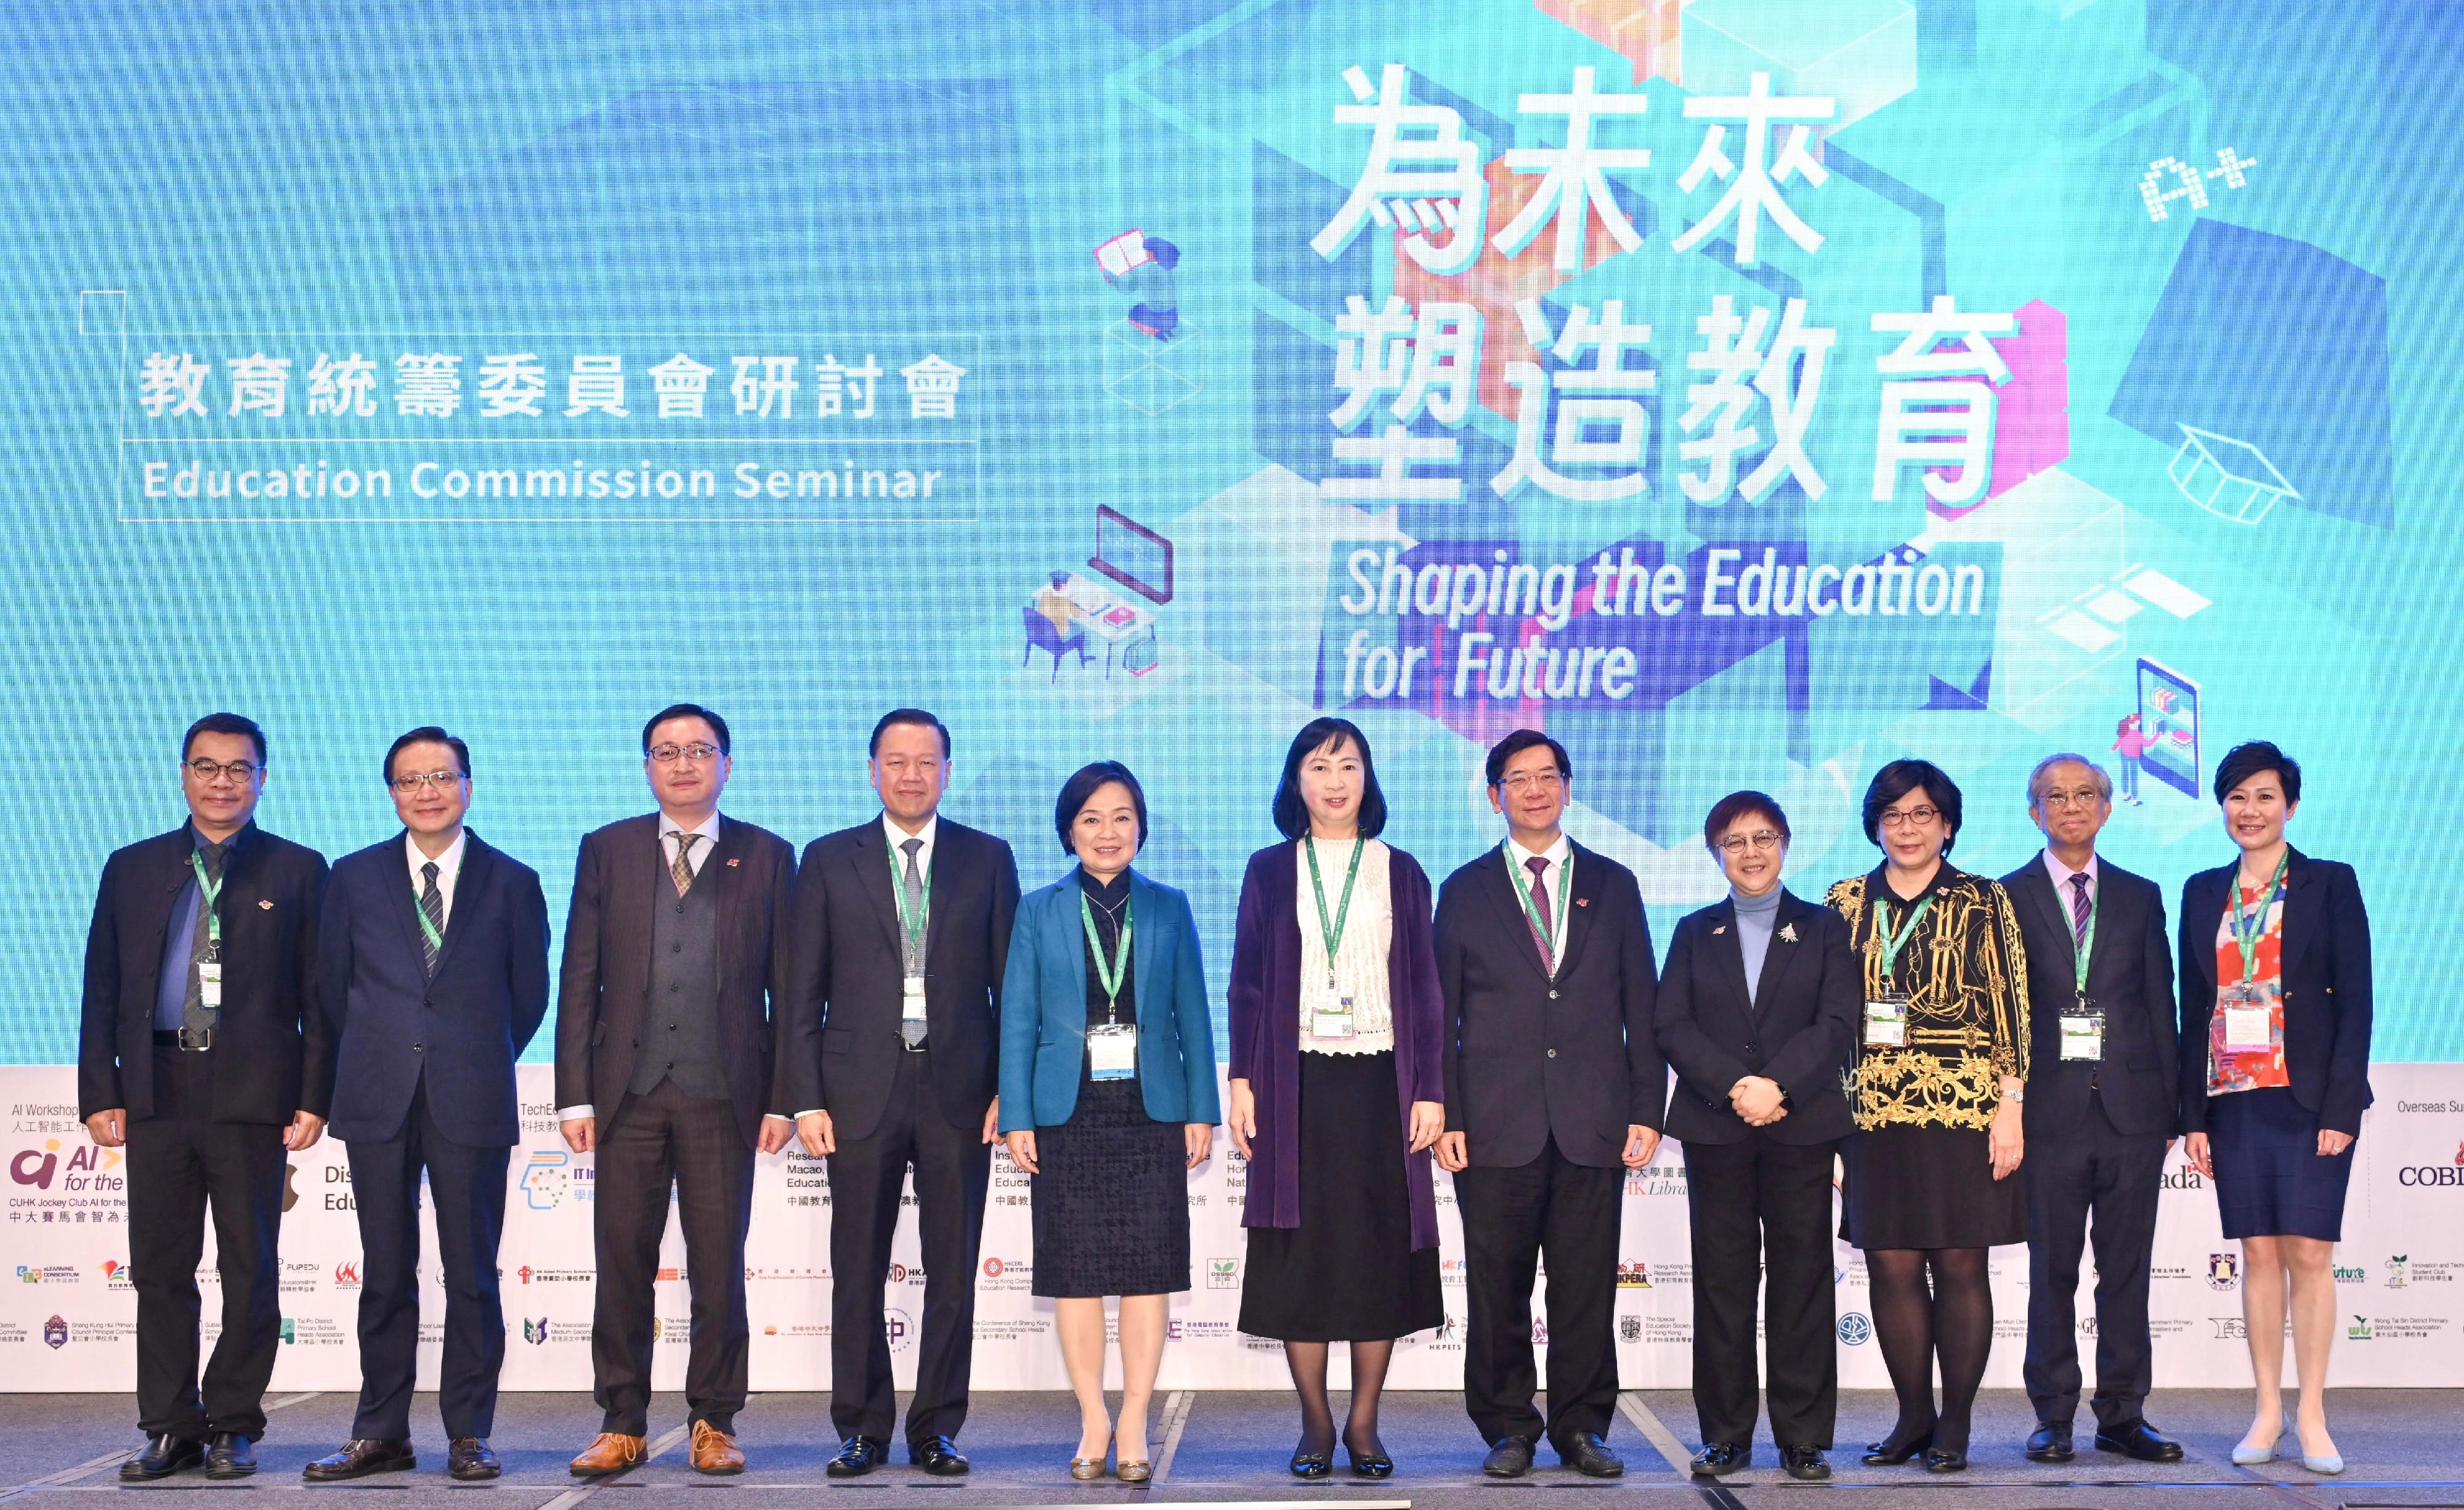 The Chairman of the Education Commission, Mr Tim Lui (fourth left); the Secretary for Education, Dr Choi Yuk-lin (fifth left); the Permanent Secretary for Education, Ms Michelle Li (sixth left), and other members of the Education Commission are pictured at the opening ceremony of the Shaping the Education for Future Seminar organised by the Education Commission today (December 8).